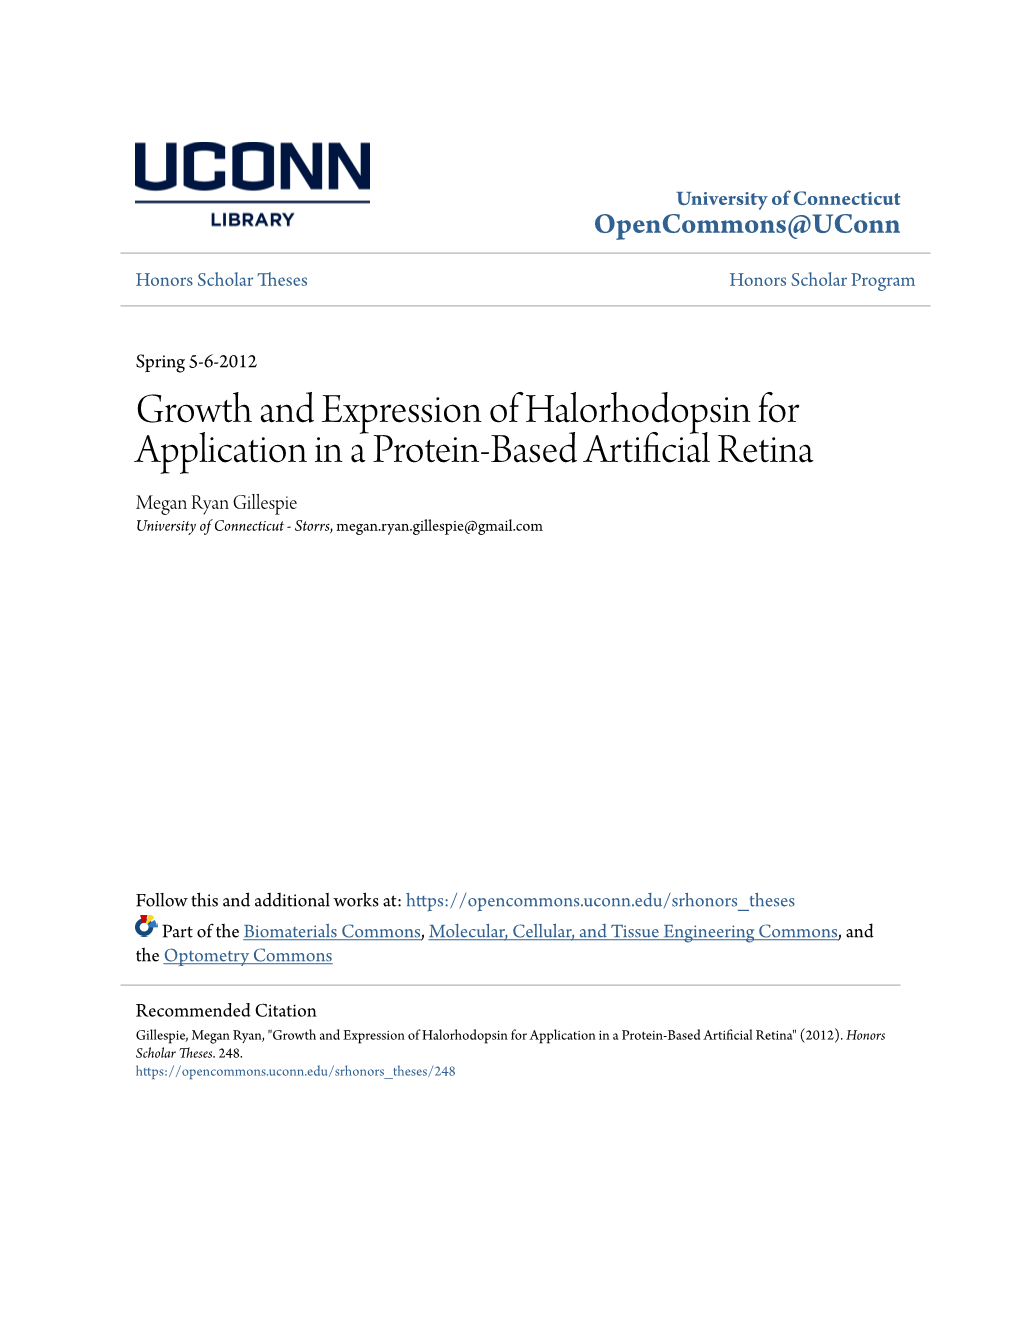 Growth and Expression of Halorhodopsin for Application in A